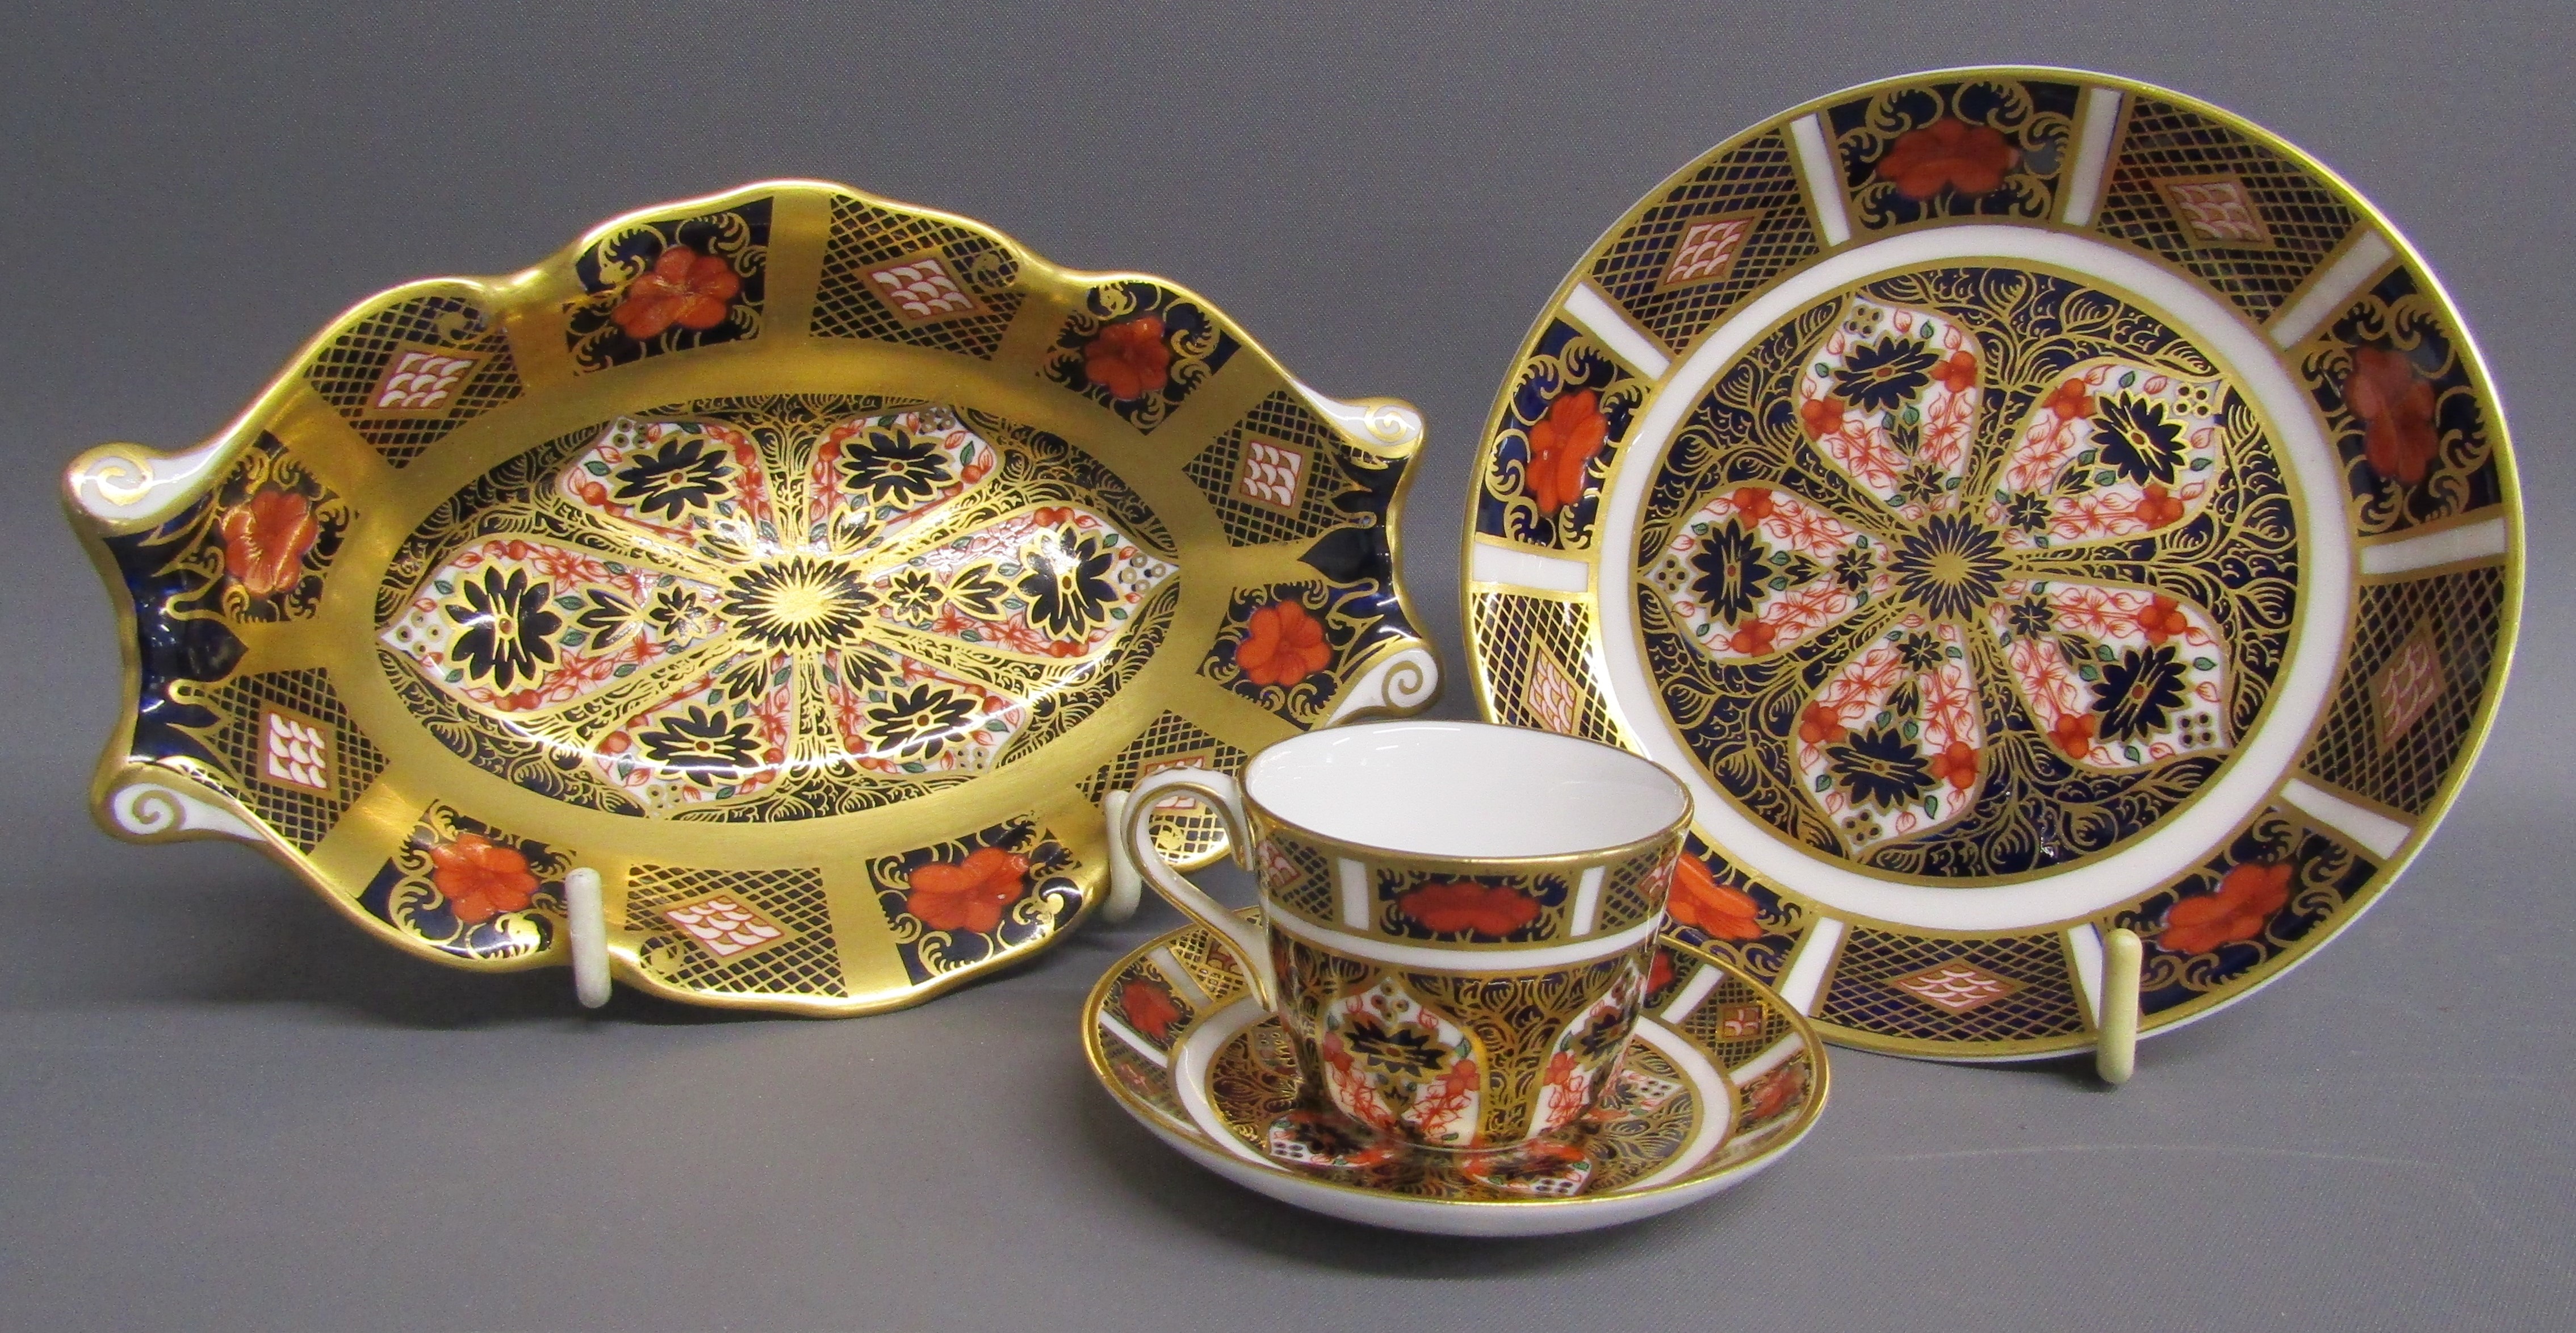 Royal Crown Derby Imari 1128 trinket dish, oval dish and miniature teacup and saucer